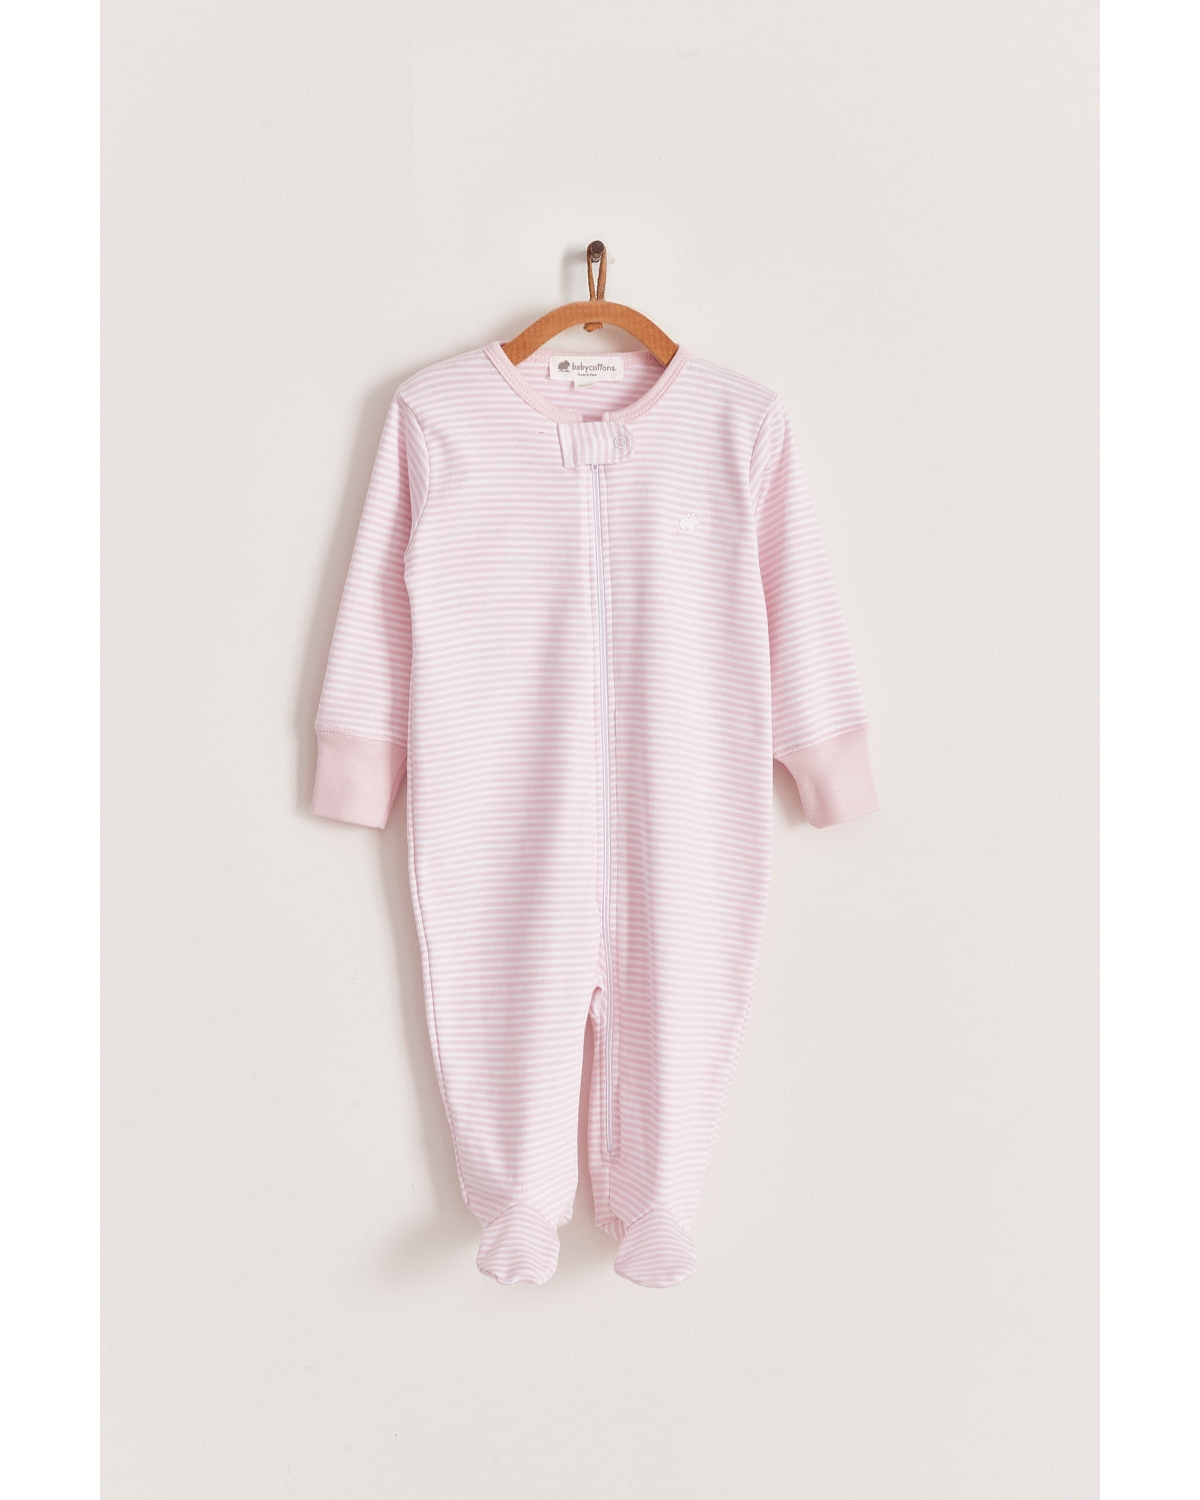 Babycottons Kids'  Girls Premium Softest Peruvian Pima Cotton In The Woods Pink Zipper Footed Pajama For In